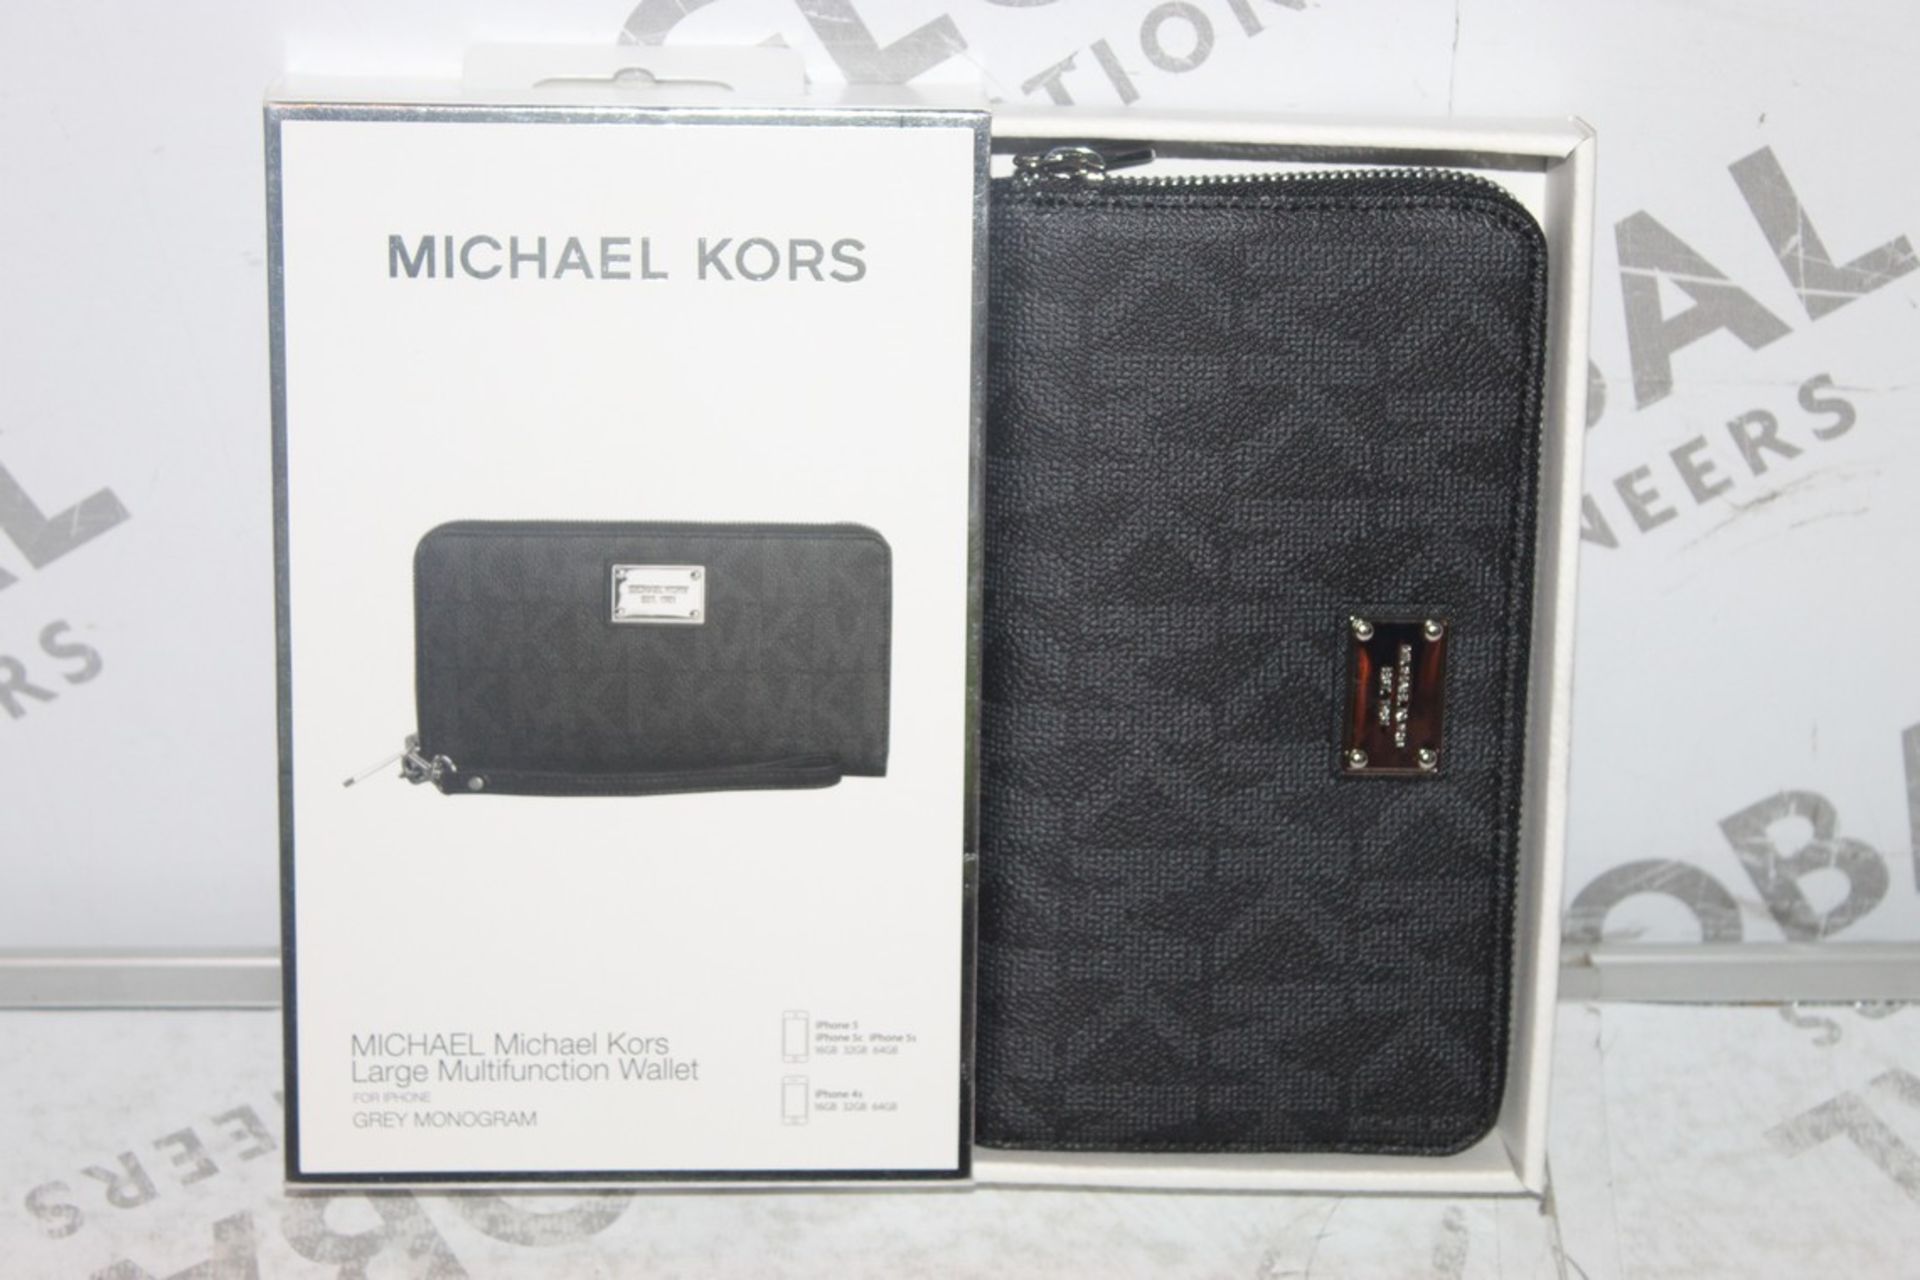 Lot to Contain 2 Brand New Michael Kors Large Multi Function Wallets in Black Combined RRP £60